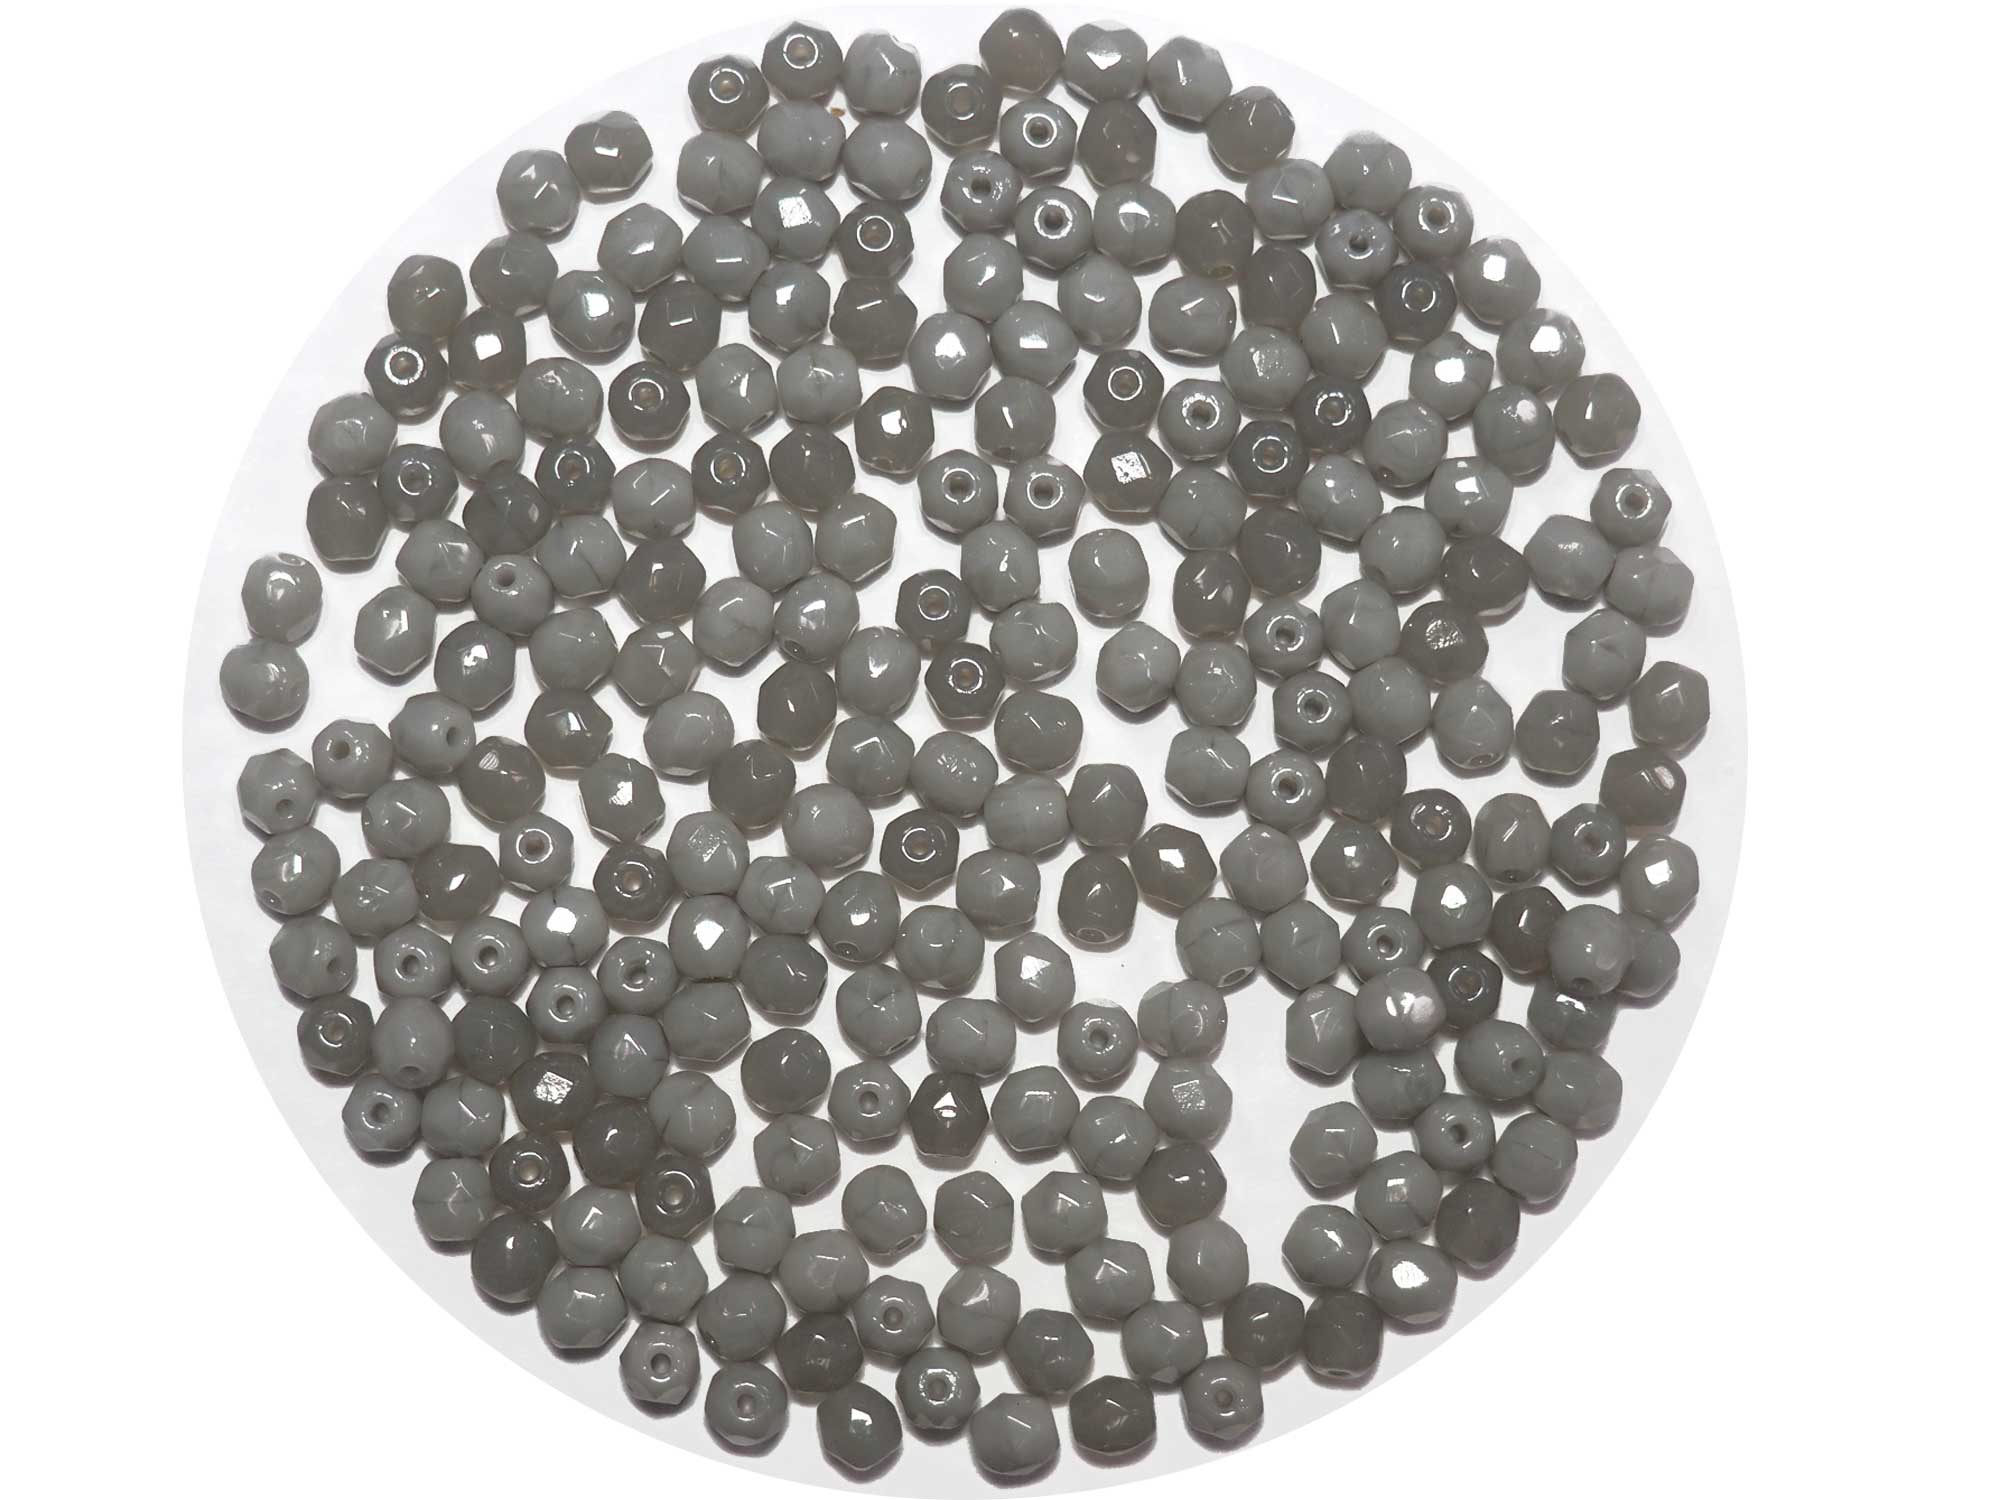 Grey Opaque Mix, 2-tone, Czech Fire Polished Round Faceted Glass Beads, 4mm 100pcs, P464